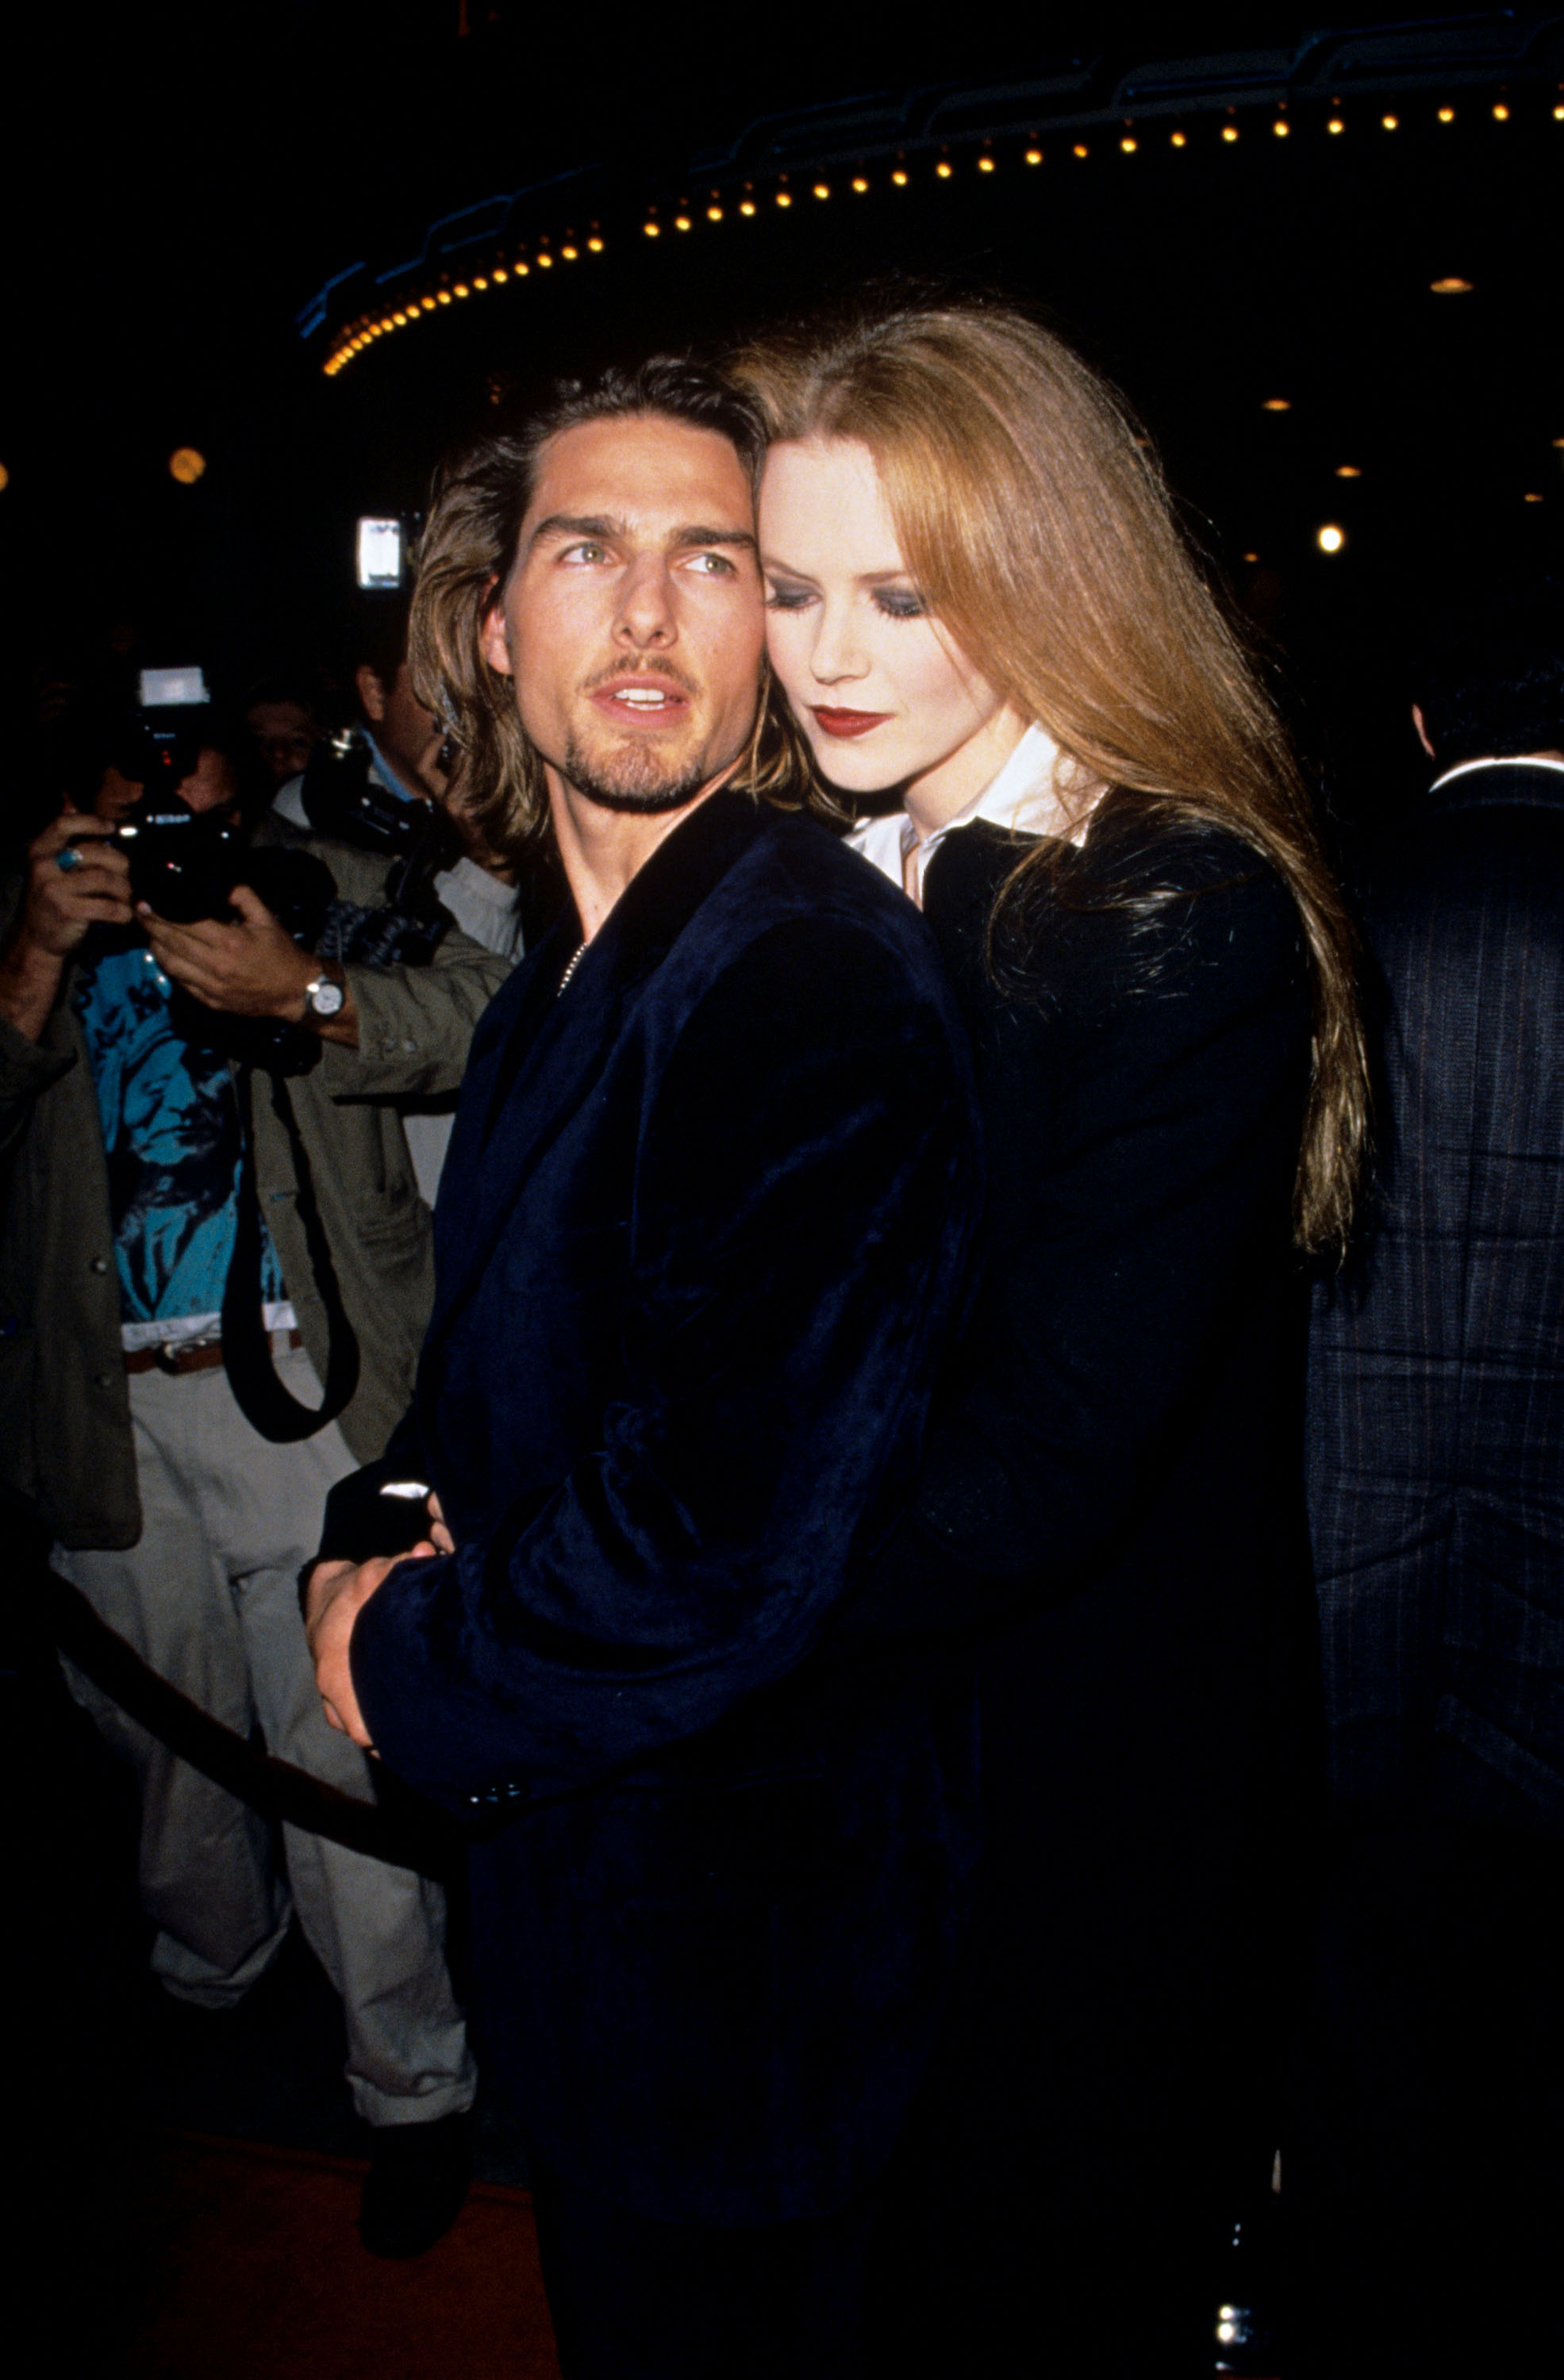 Tom Cruise and Nicole Kidman in California, United States. | Source: Getty Images